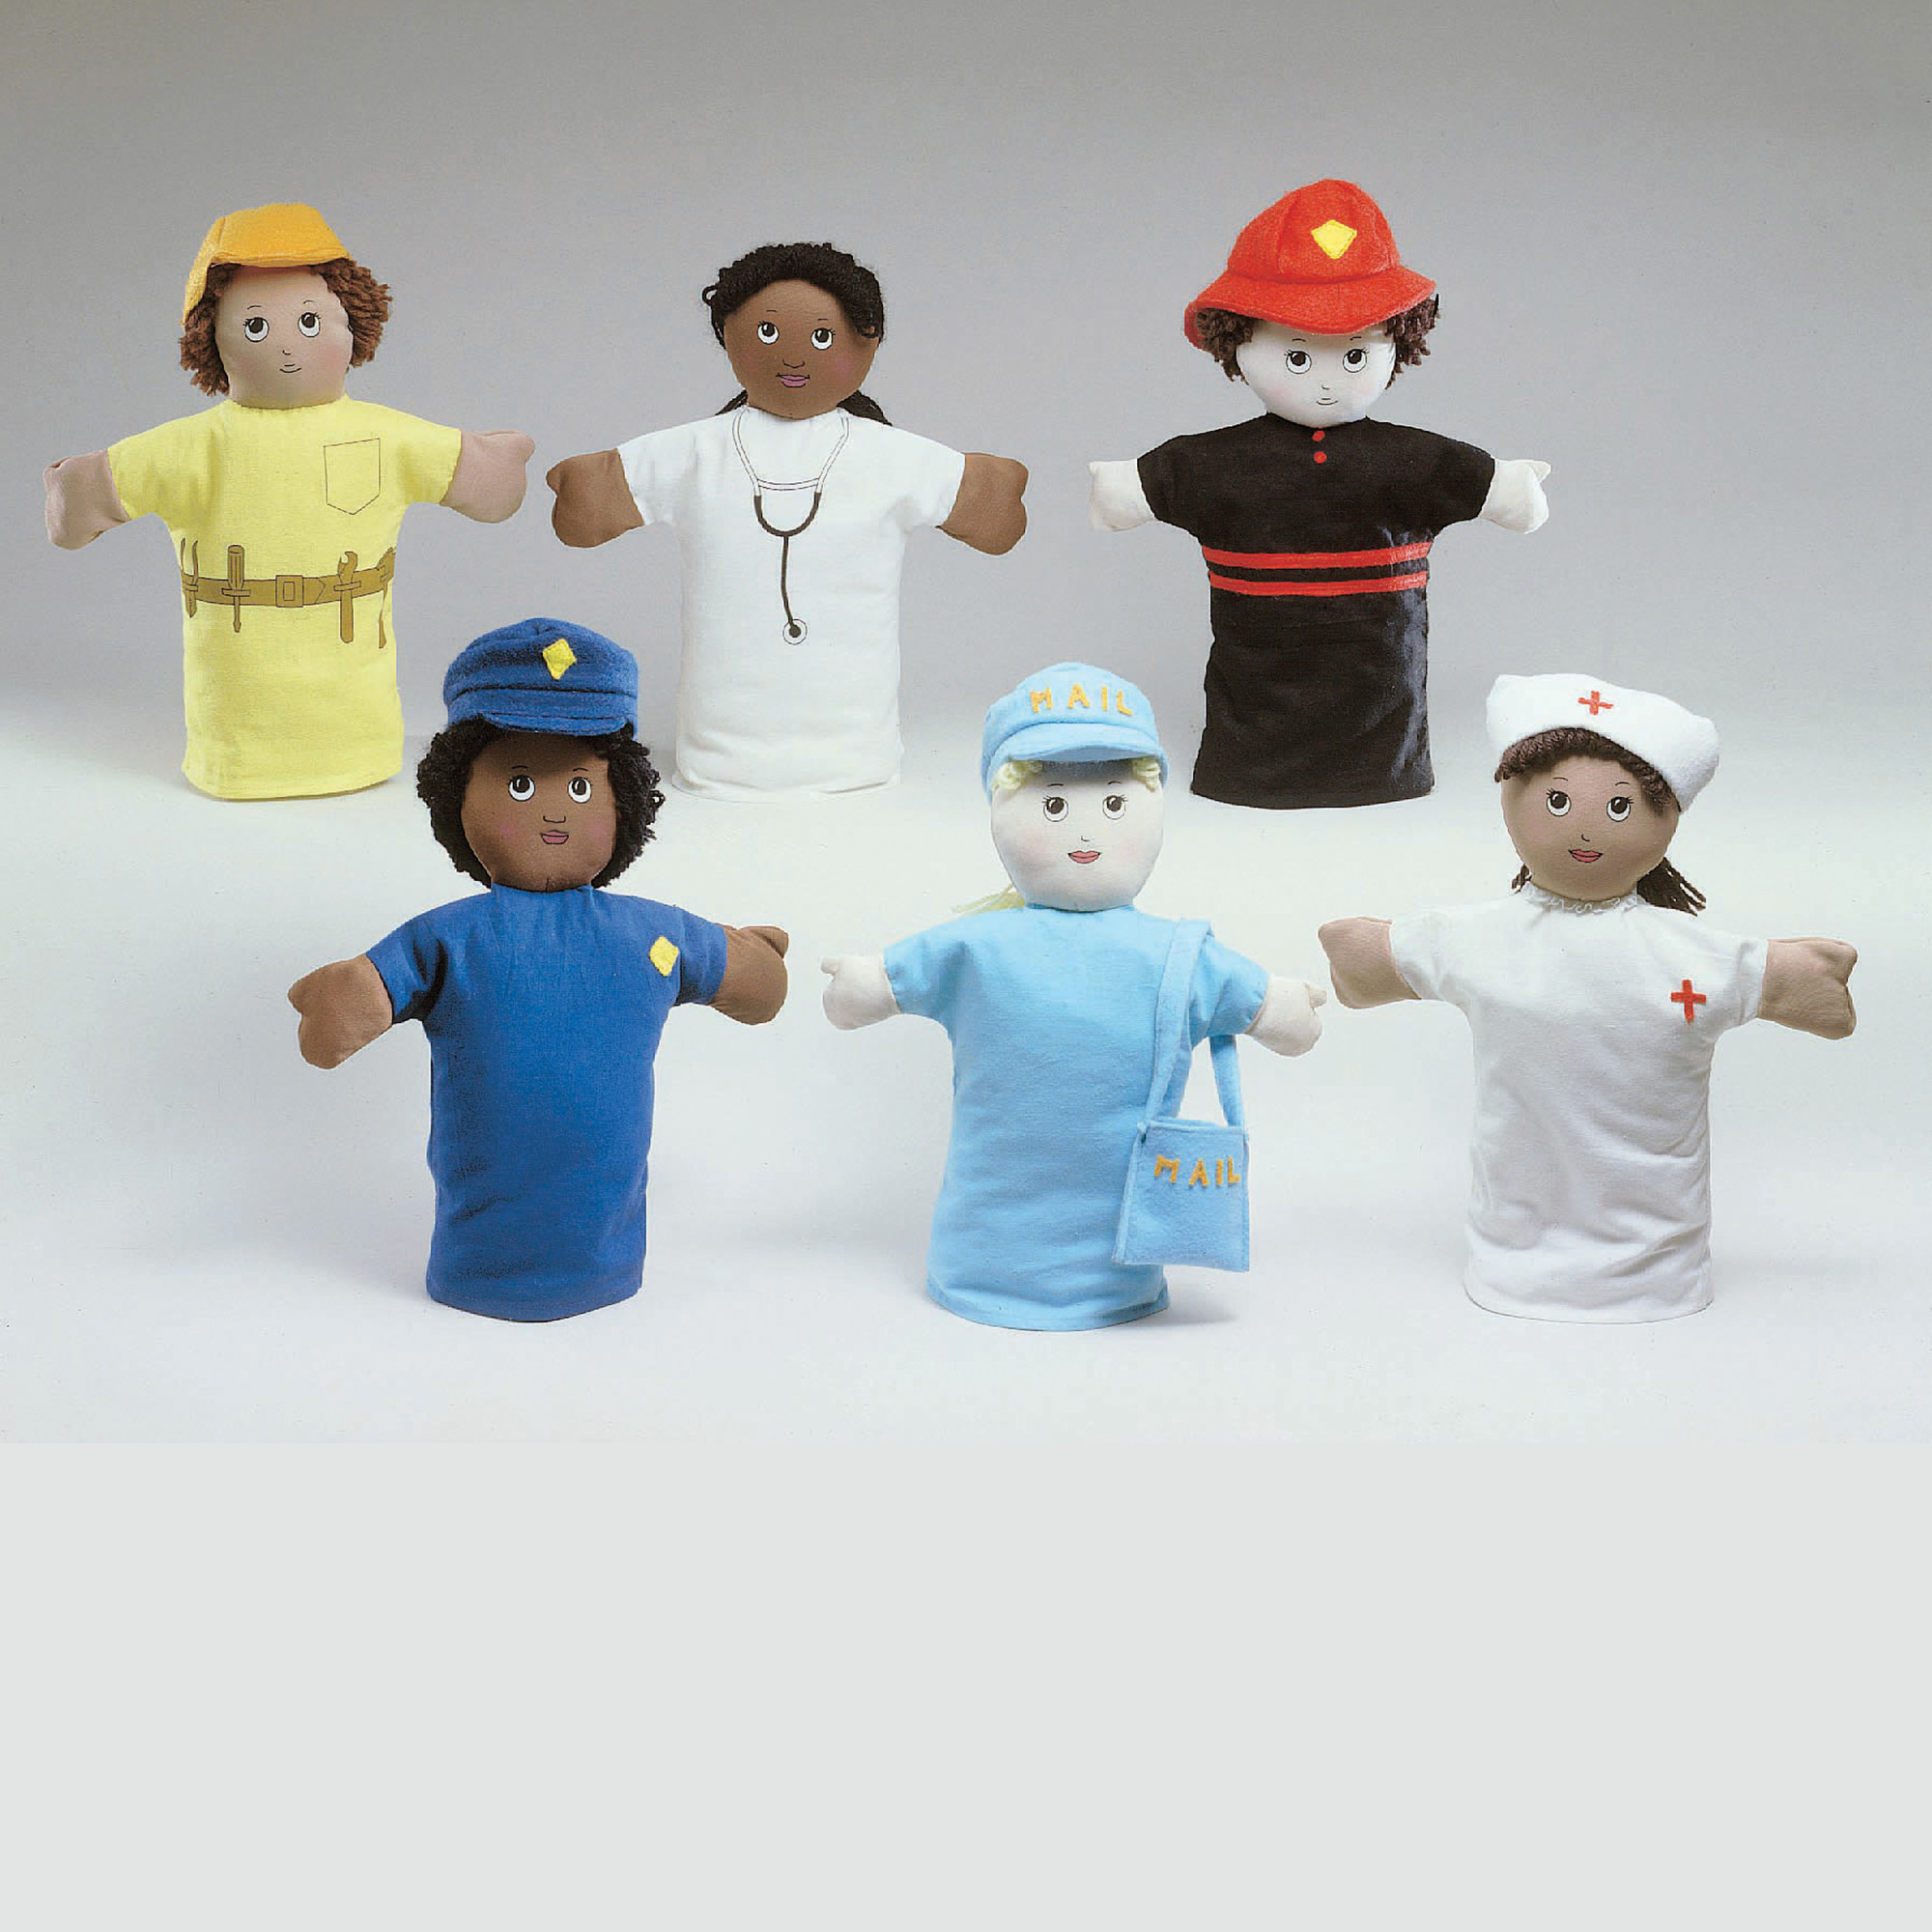 23 cm  Career Hand Puppets - Set of 6